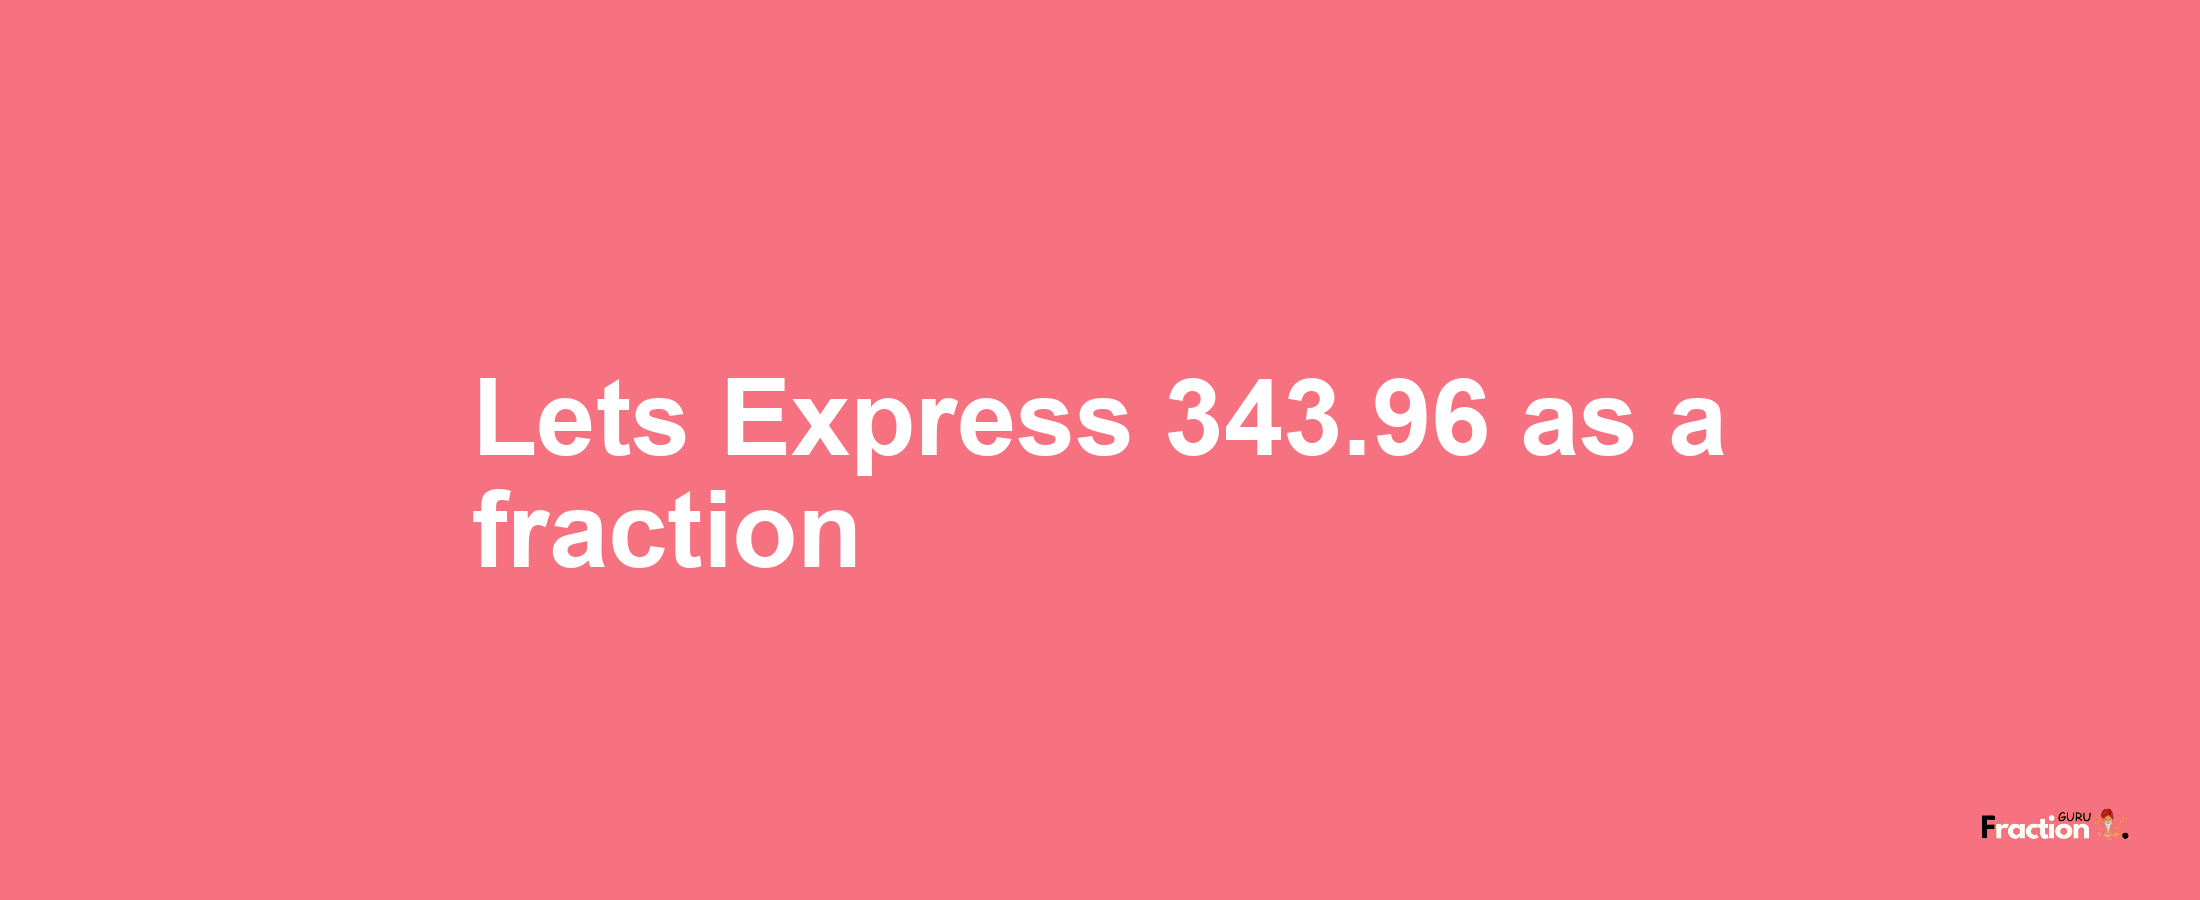 Lets Express 343.96 as afraction